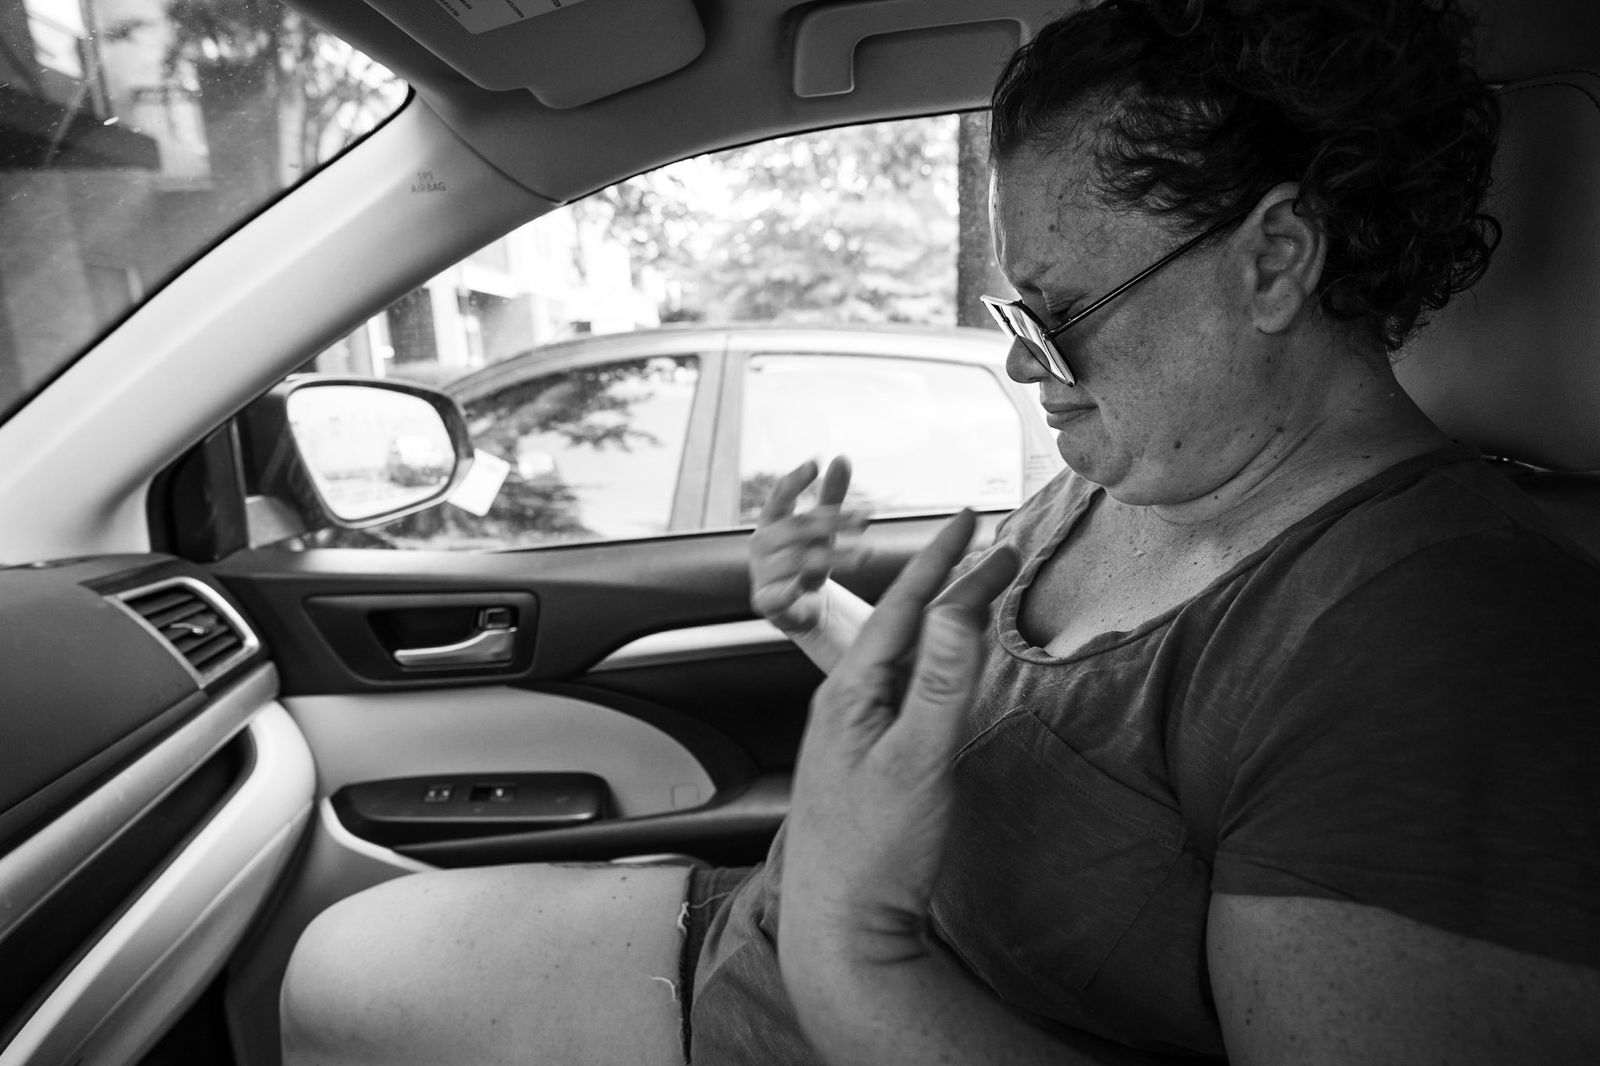 © Lisa Winner - Image from the The Daughterhood Project - The Untold story of family caregiving photography project